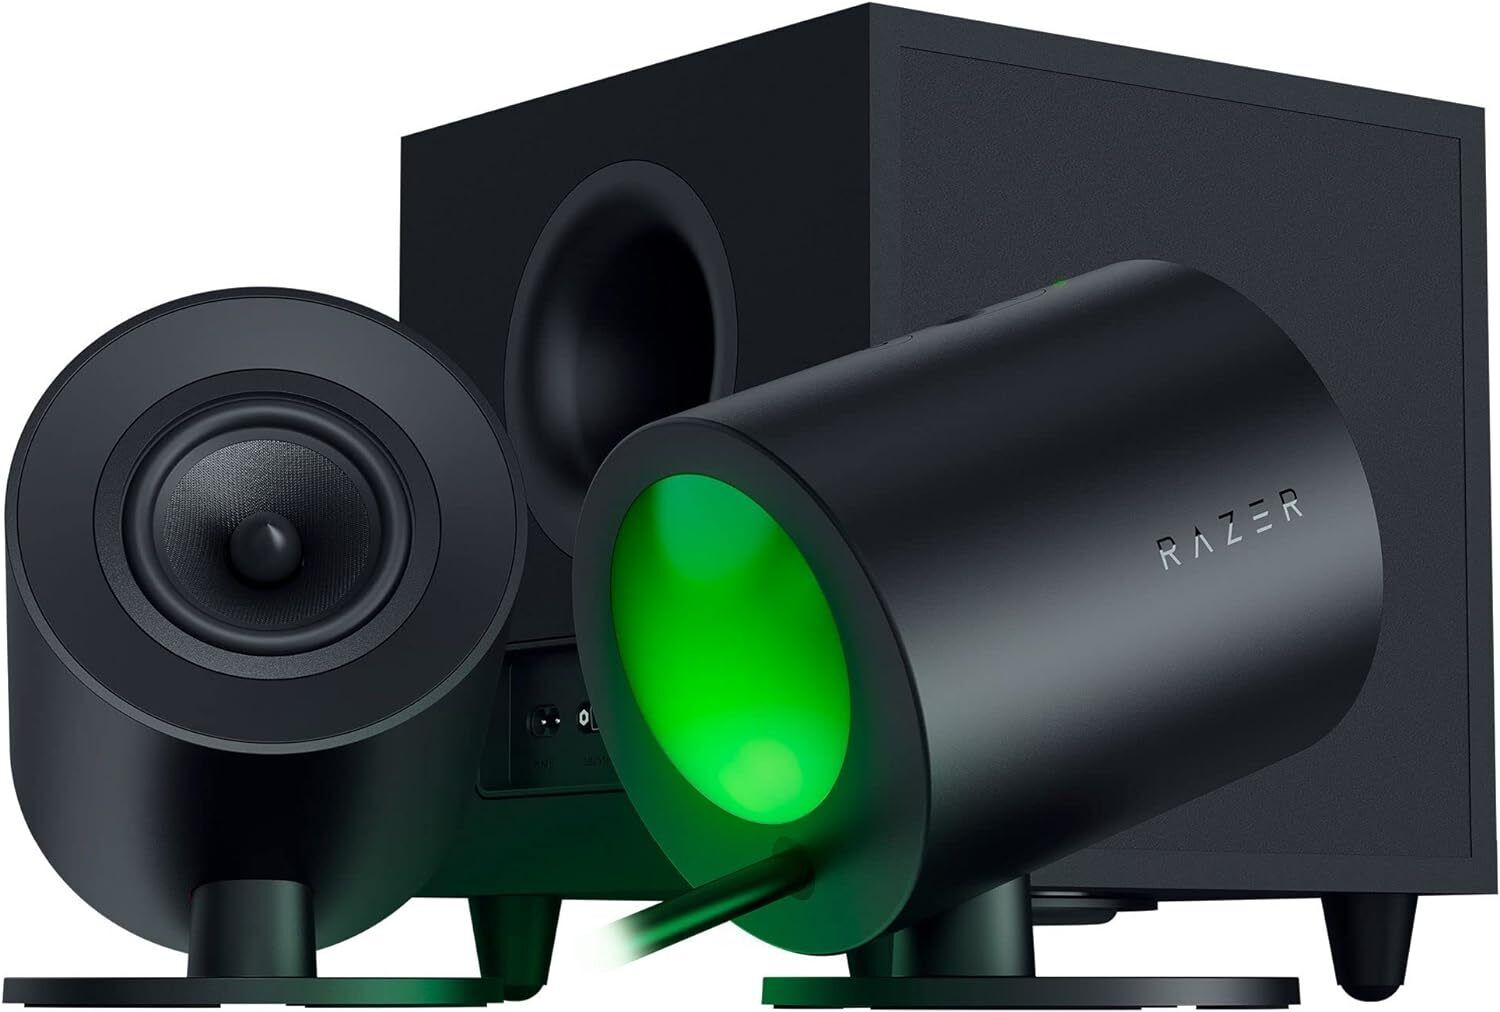 Razer Nommo V2 2.1 PC Gaming Speakers with Wired Subwoofer Certified Refurbished